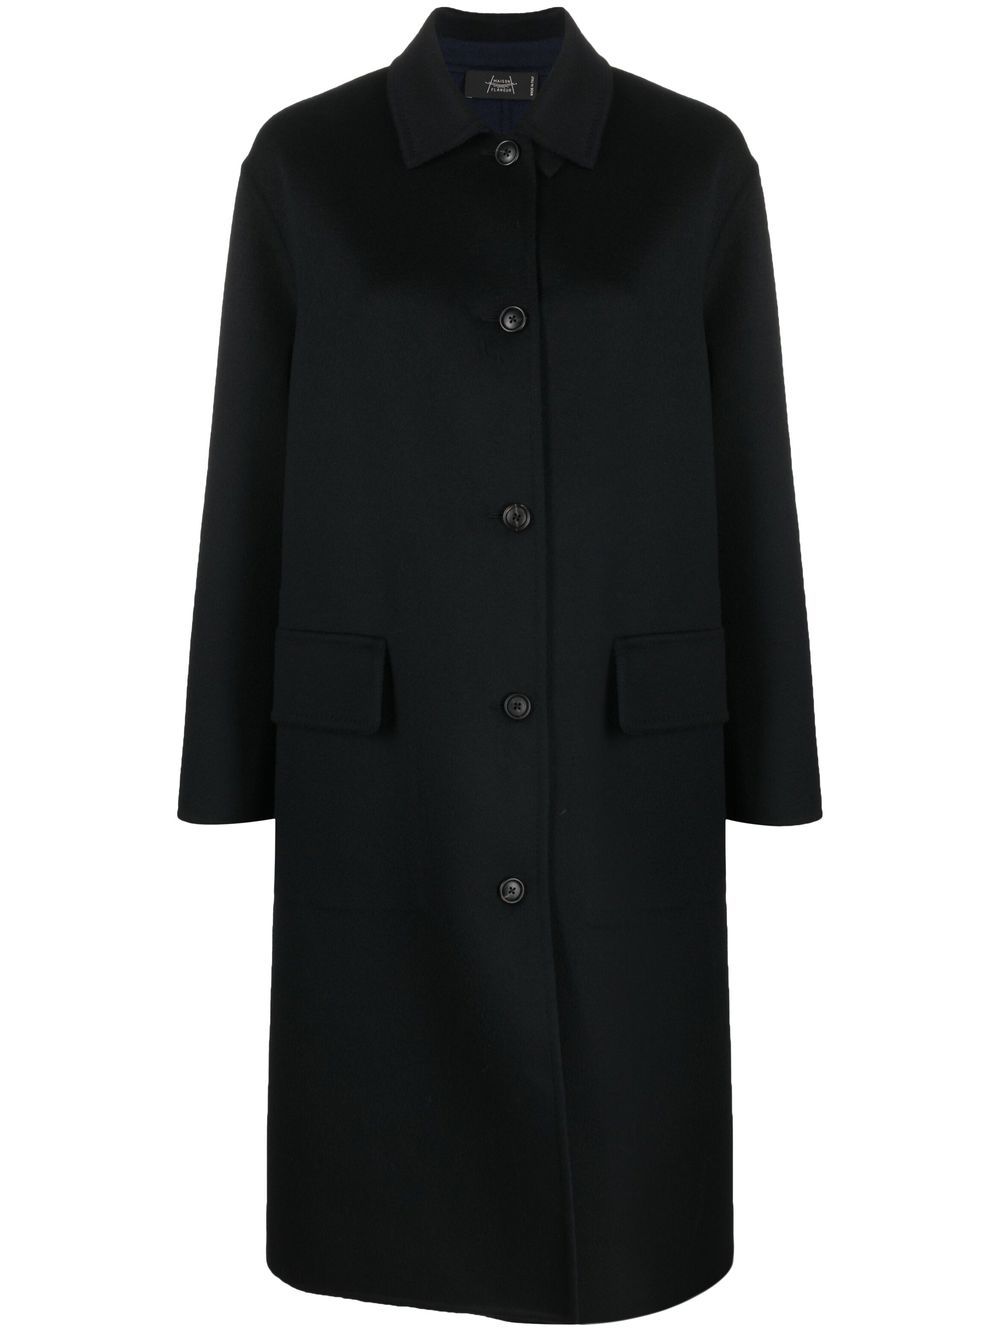 Maison Flaneur single-breasted wool-cashmere Coat - Farfetch